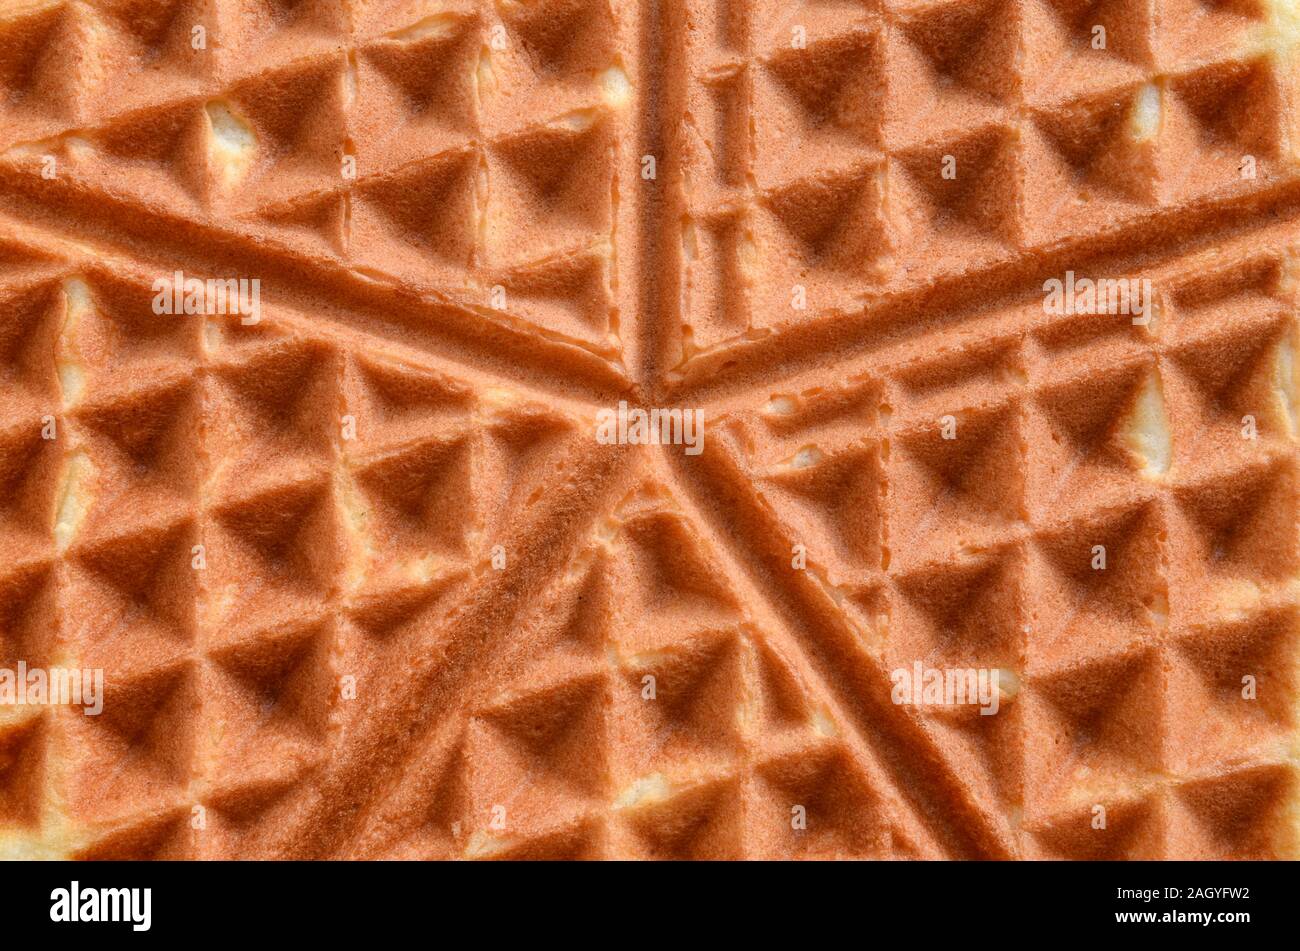 Grandma's cake surface, close up view from above, ful frame background Stock Photo